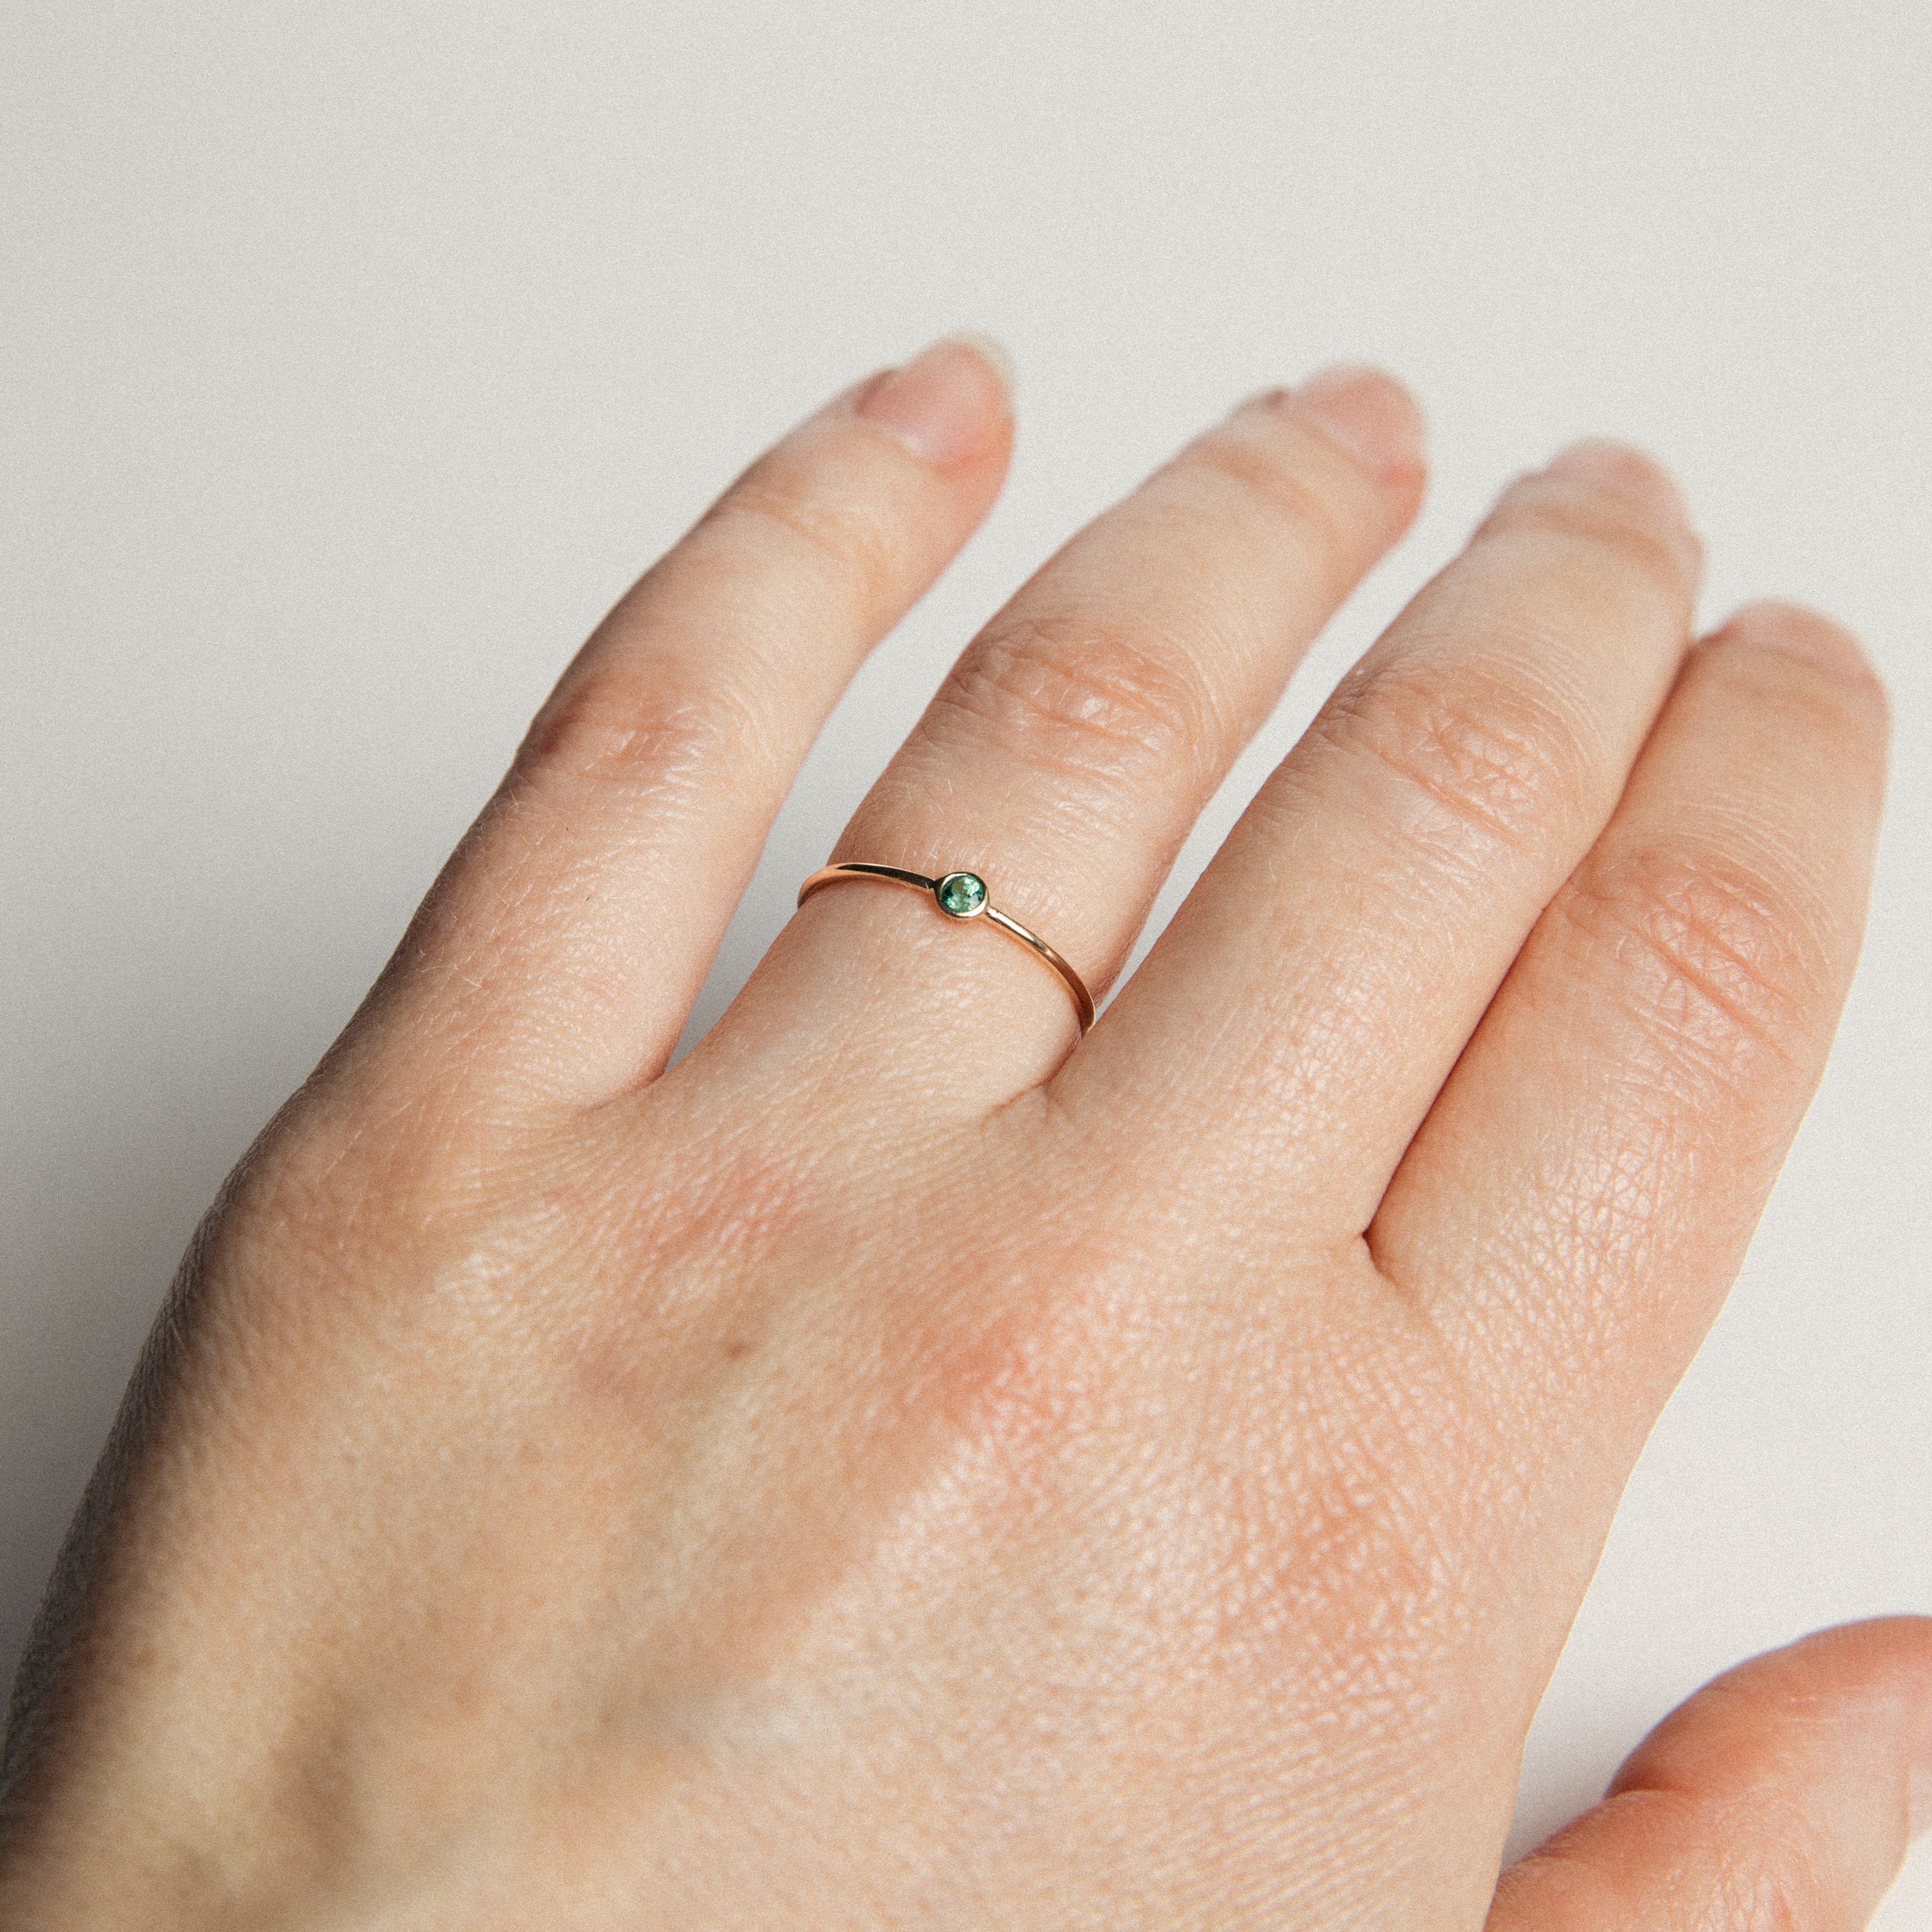 Large Kaya Minimal Ring in 14k Gold set with Emerald by SHW Fine Jewelry